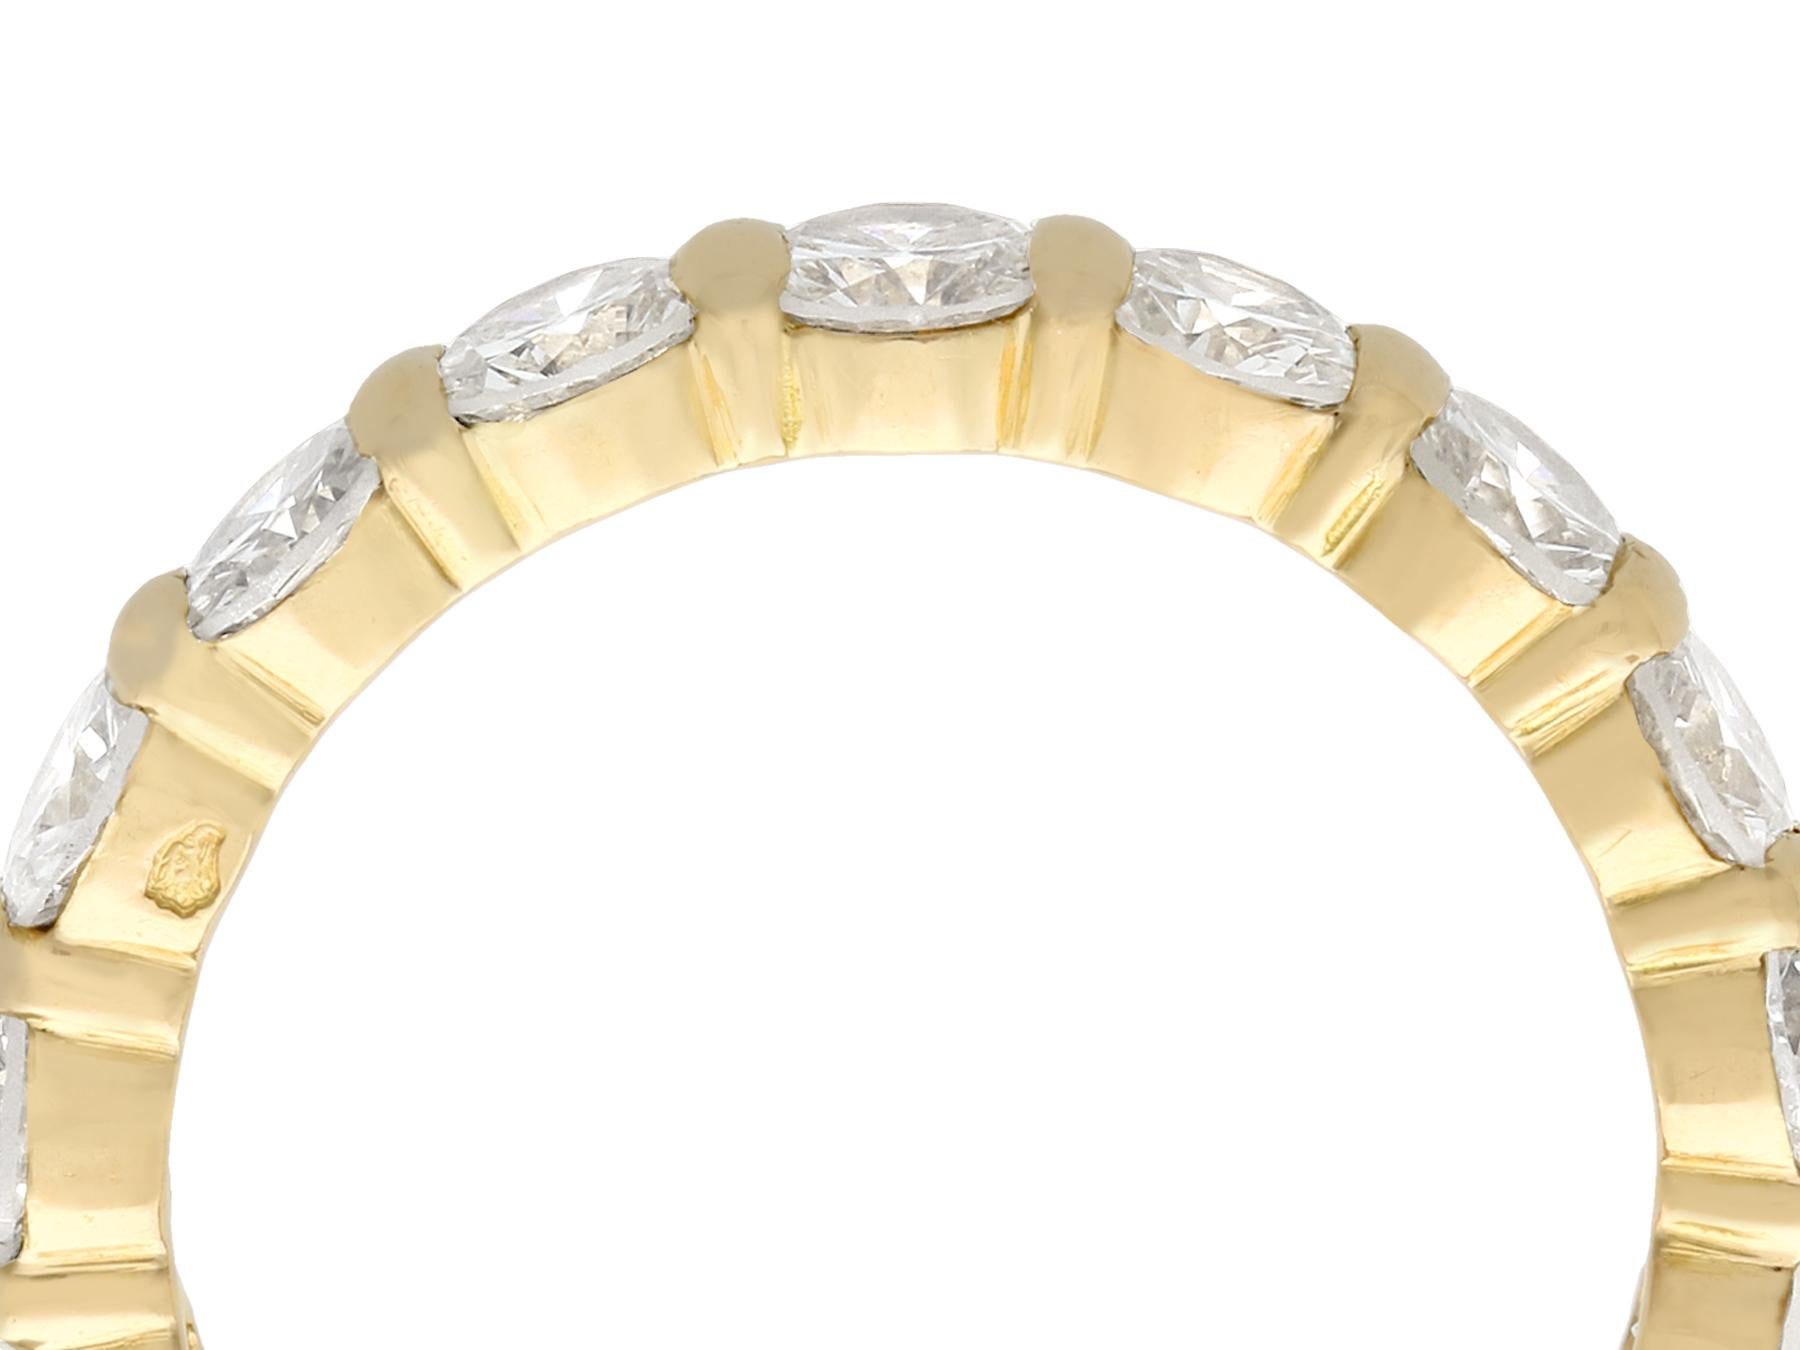 A stunning vintage 1990s 2.72 carat diamond and 18k yellow gold full eternity ring; part of our diverse diamond jewelry and estate jewelry collections.

This stunning, fine and impressive diamond eternity ring has been crafted in 18k yellow